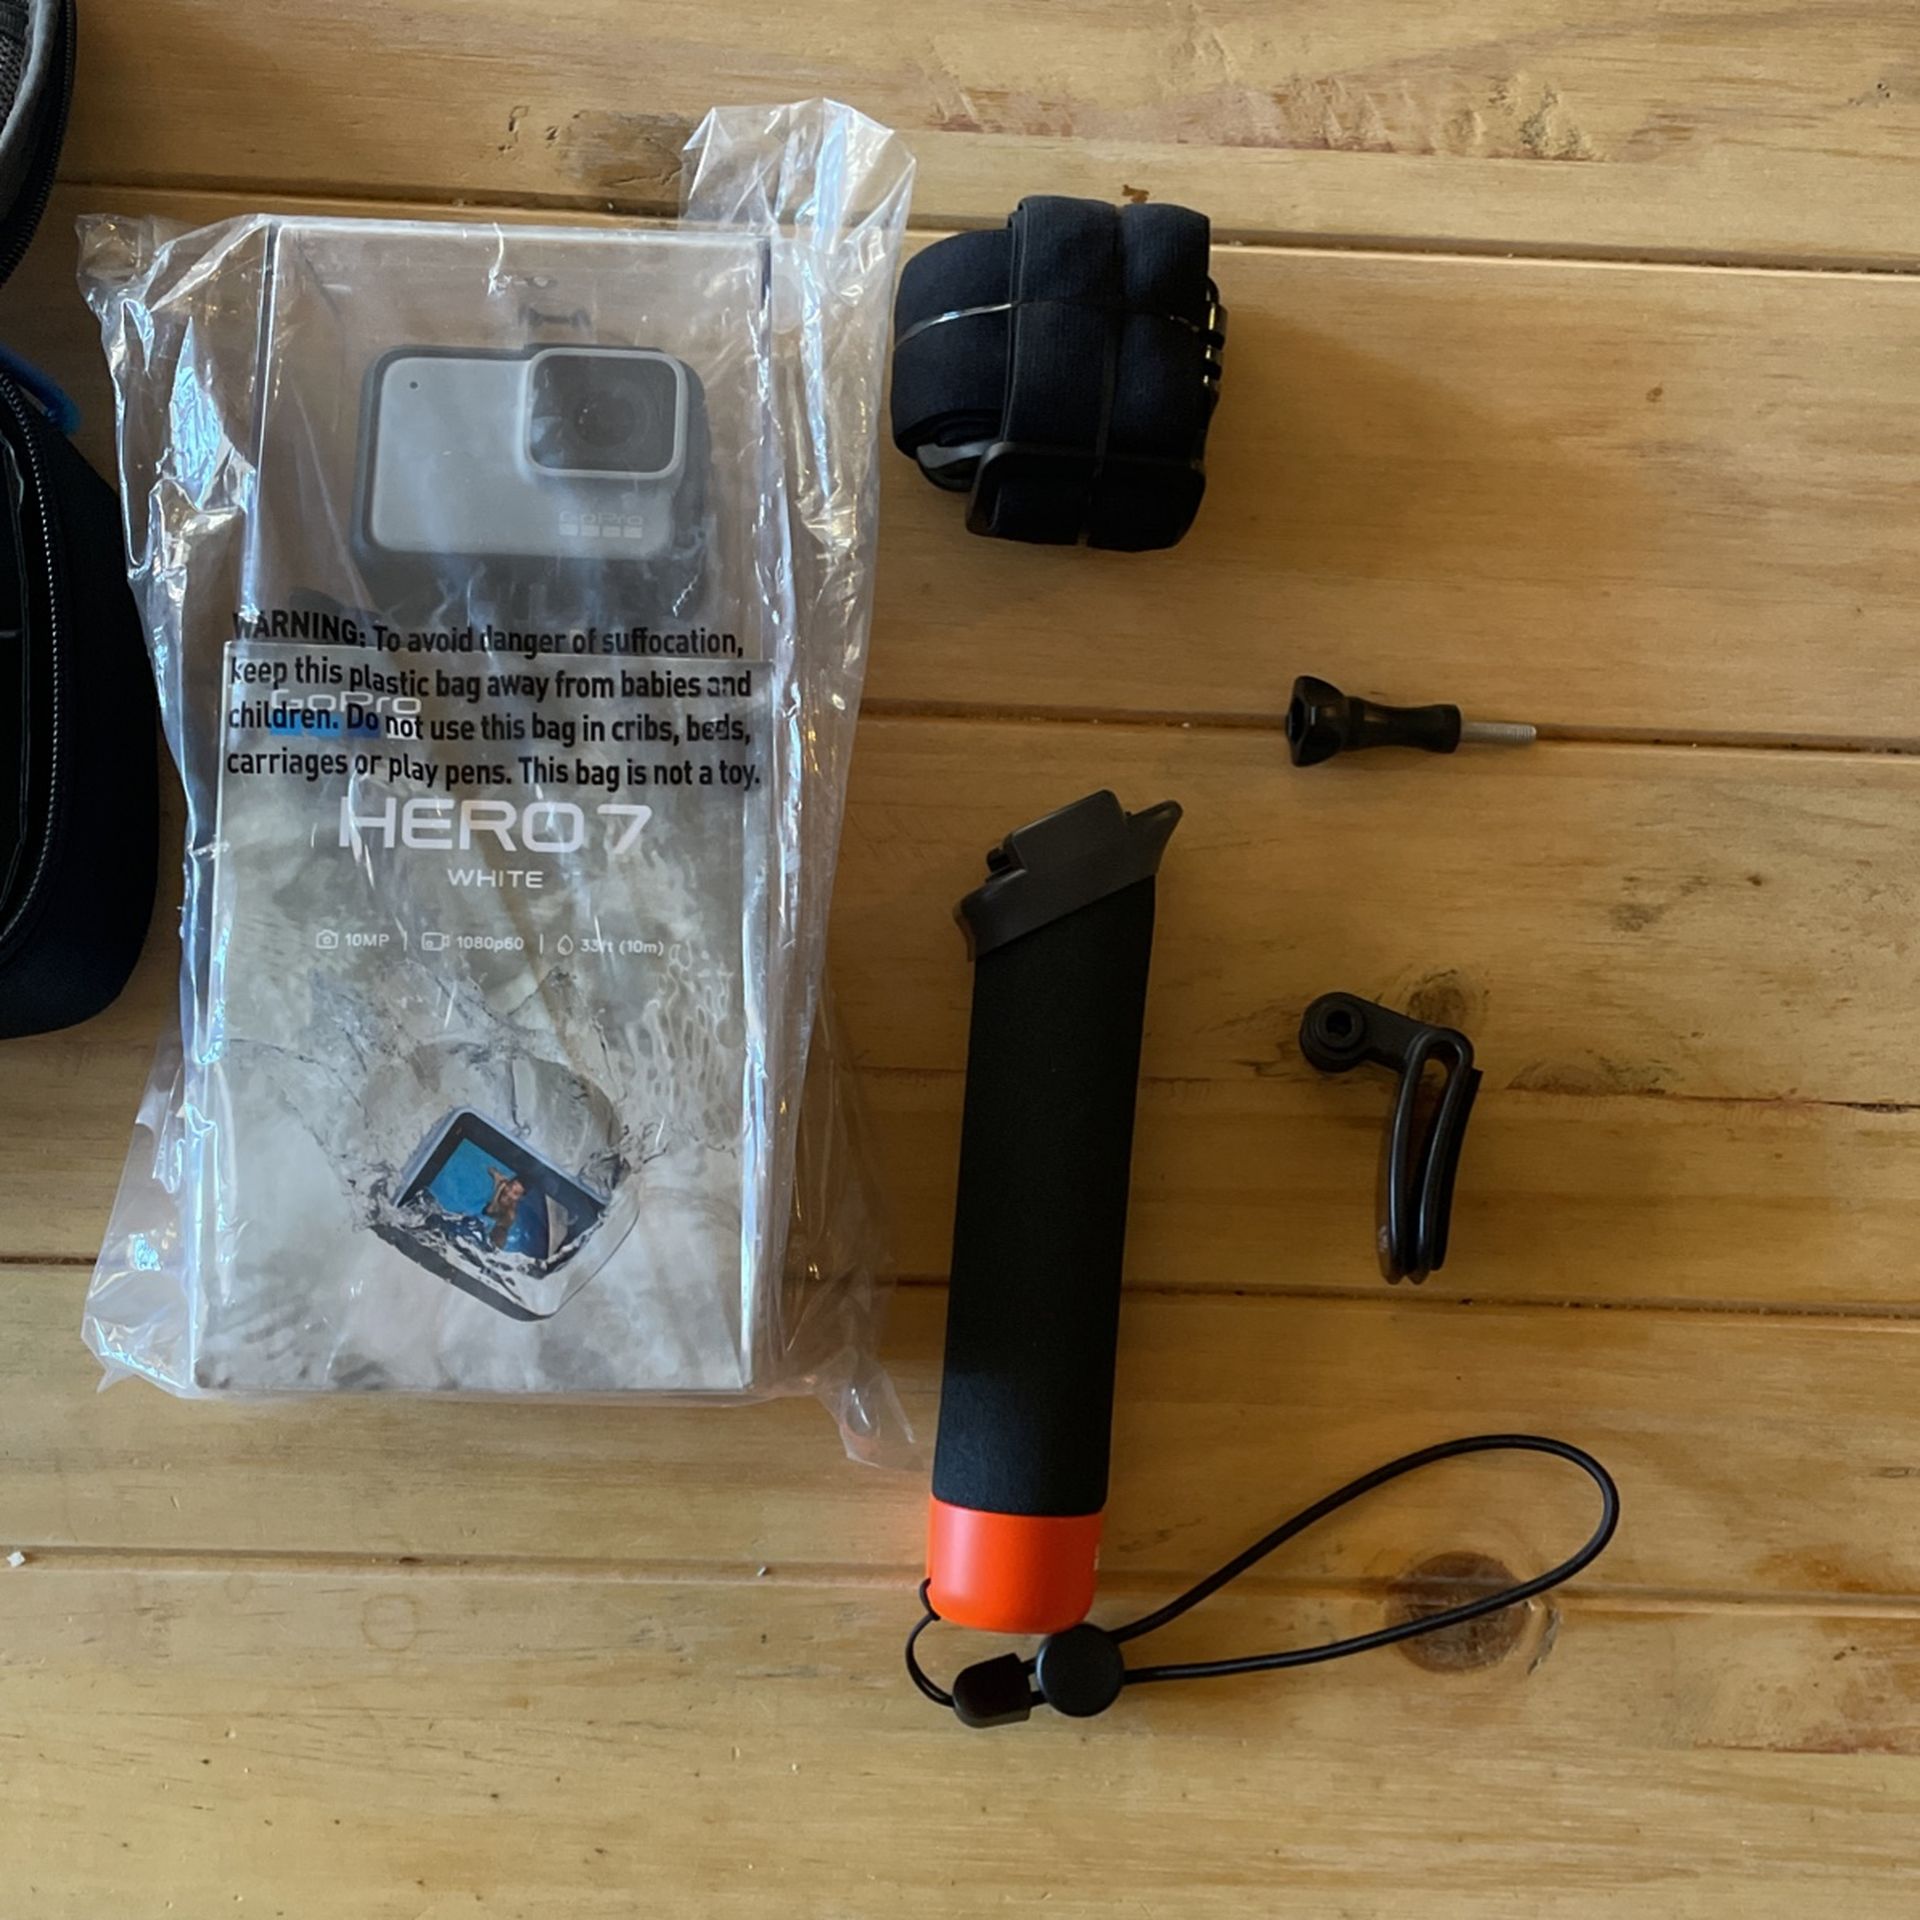 Hero 7 GoPro With Accessories (Never Used)